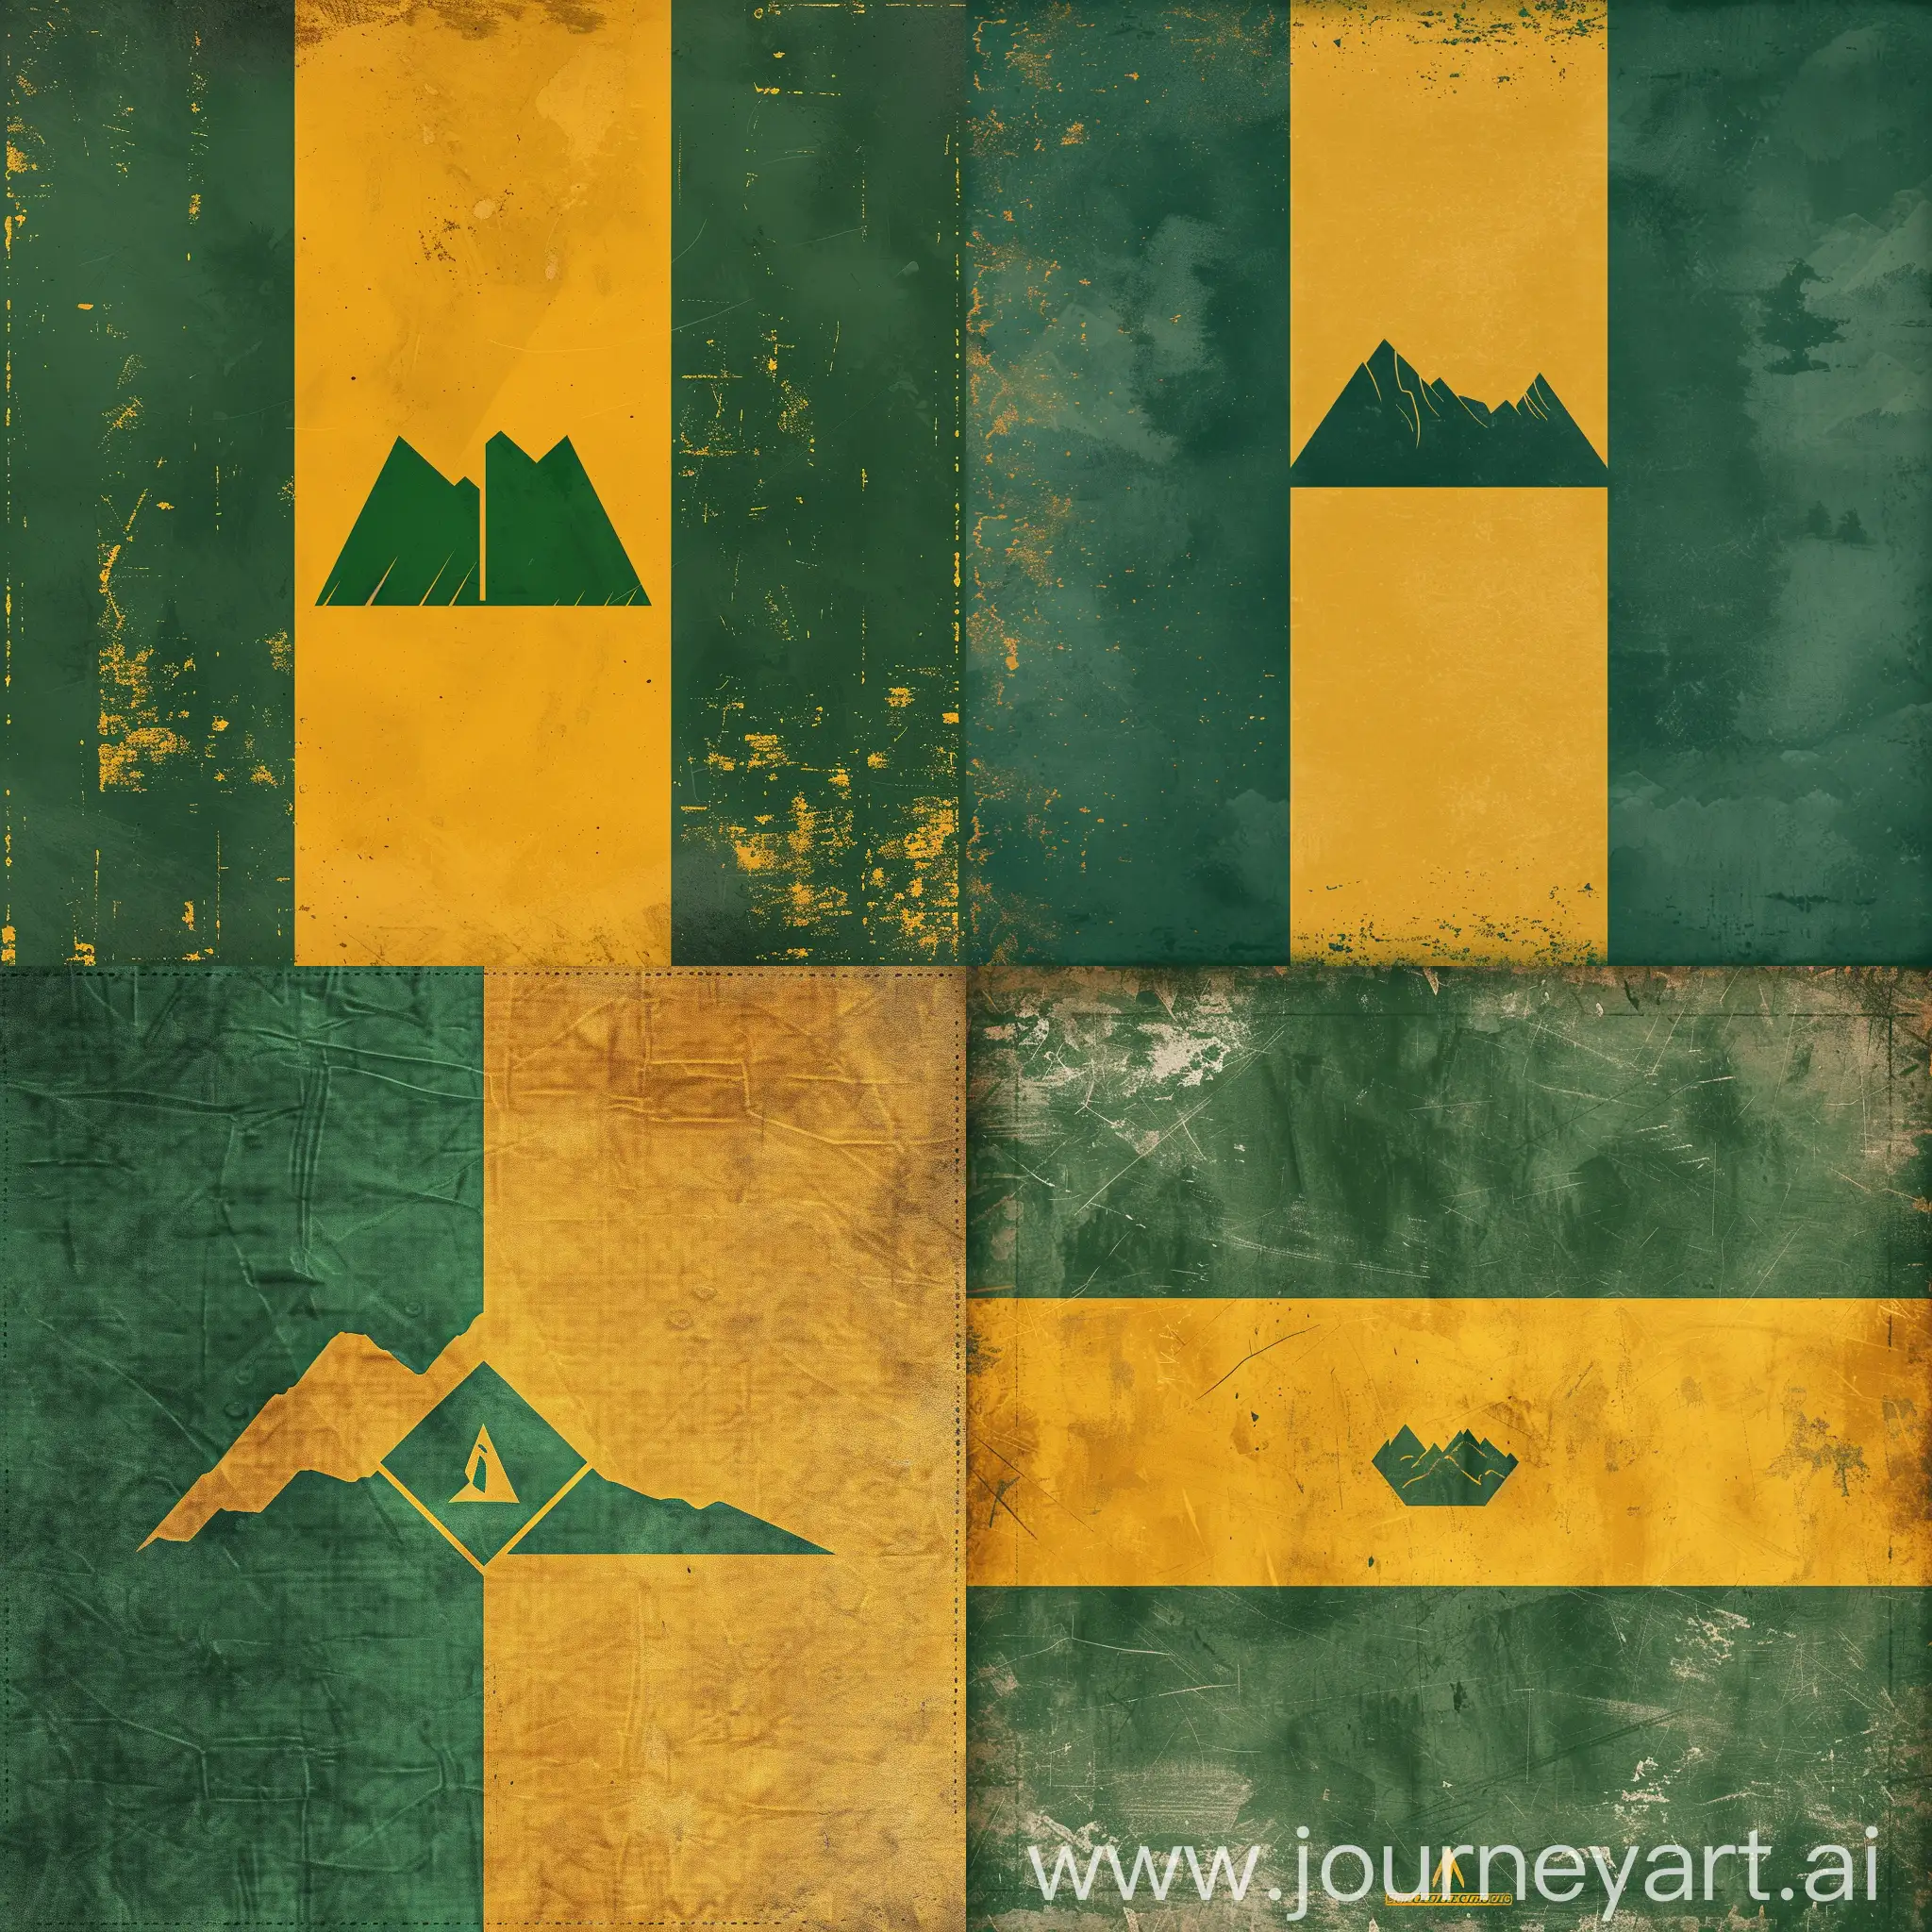 Fictitious Flag of a Country. It has two colors, green and yellow, as well as a mountain symbol in the middle. It is inspired by existing flags. The country is quite diverse, with some desert areas and others tropical, as well as various parts with high altitudes.